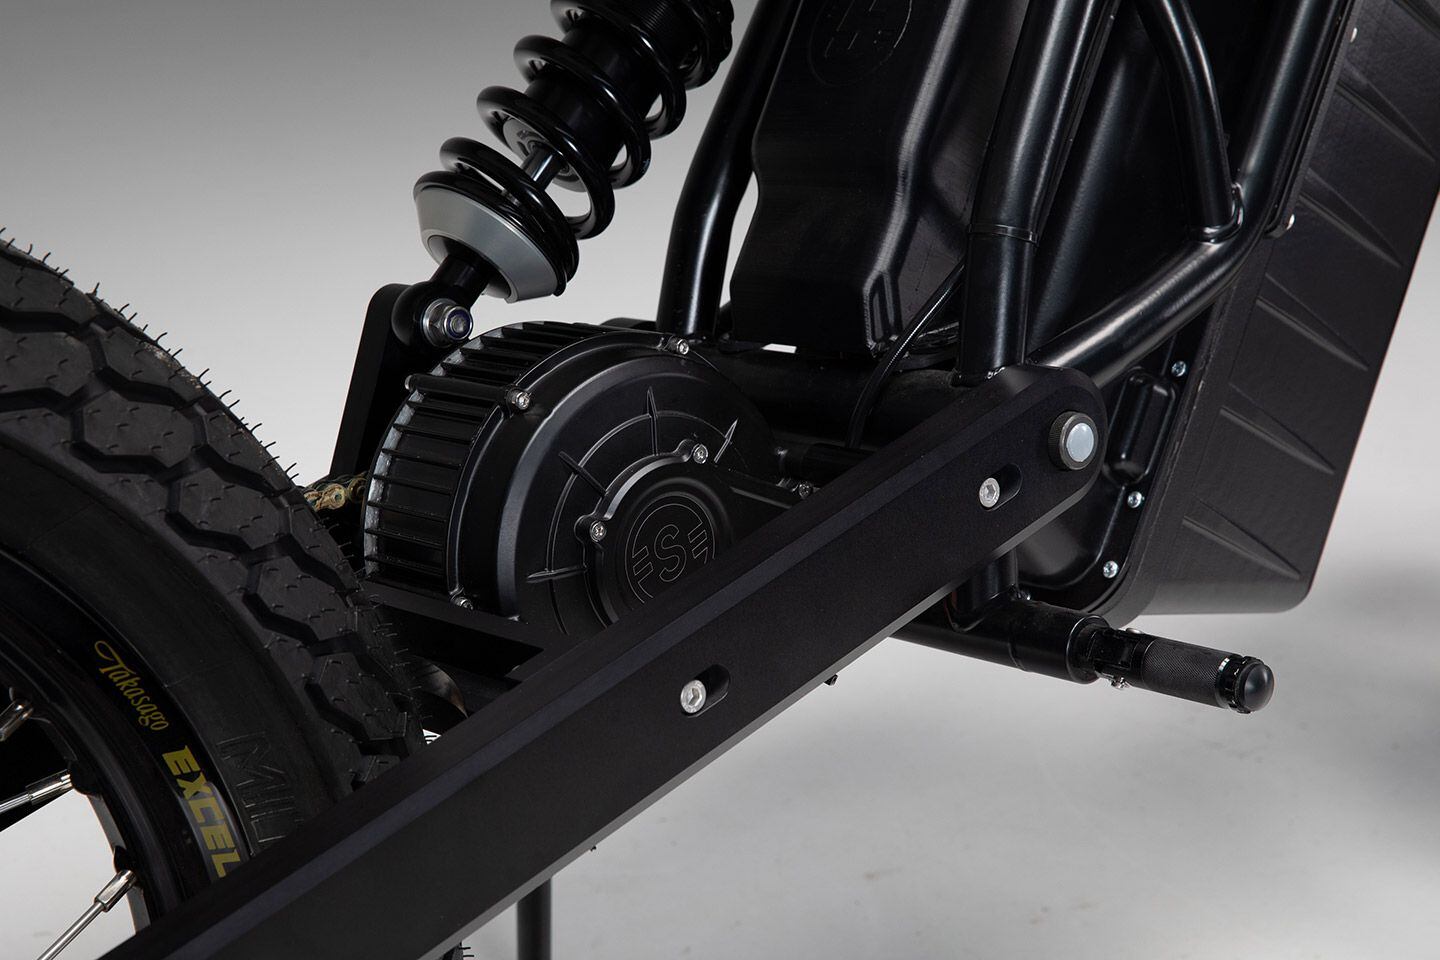 An air-cooled DC motor is mounted at the swingarm pivot; it’s good for 11kW of peak power and 8kW rated power.